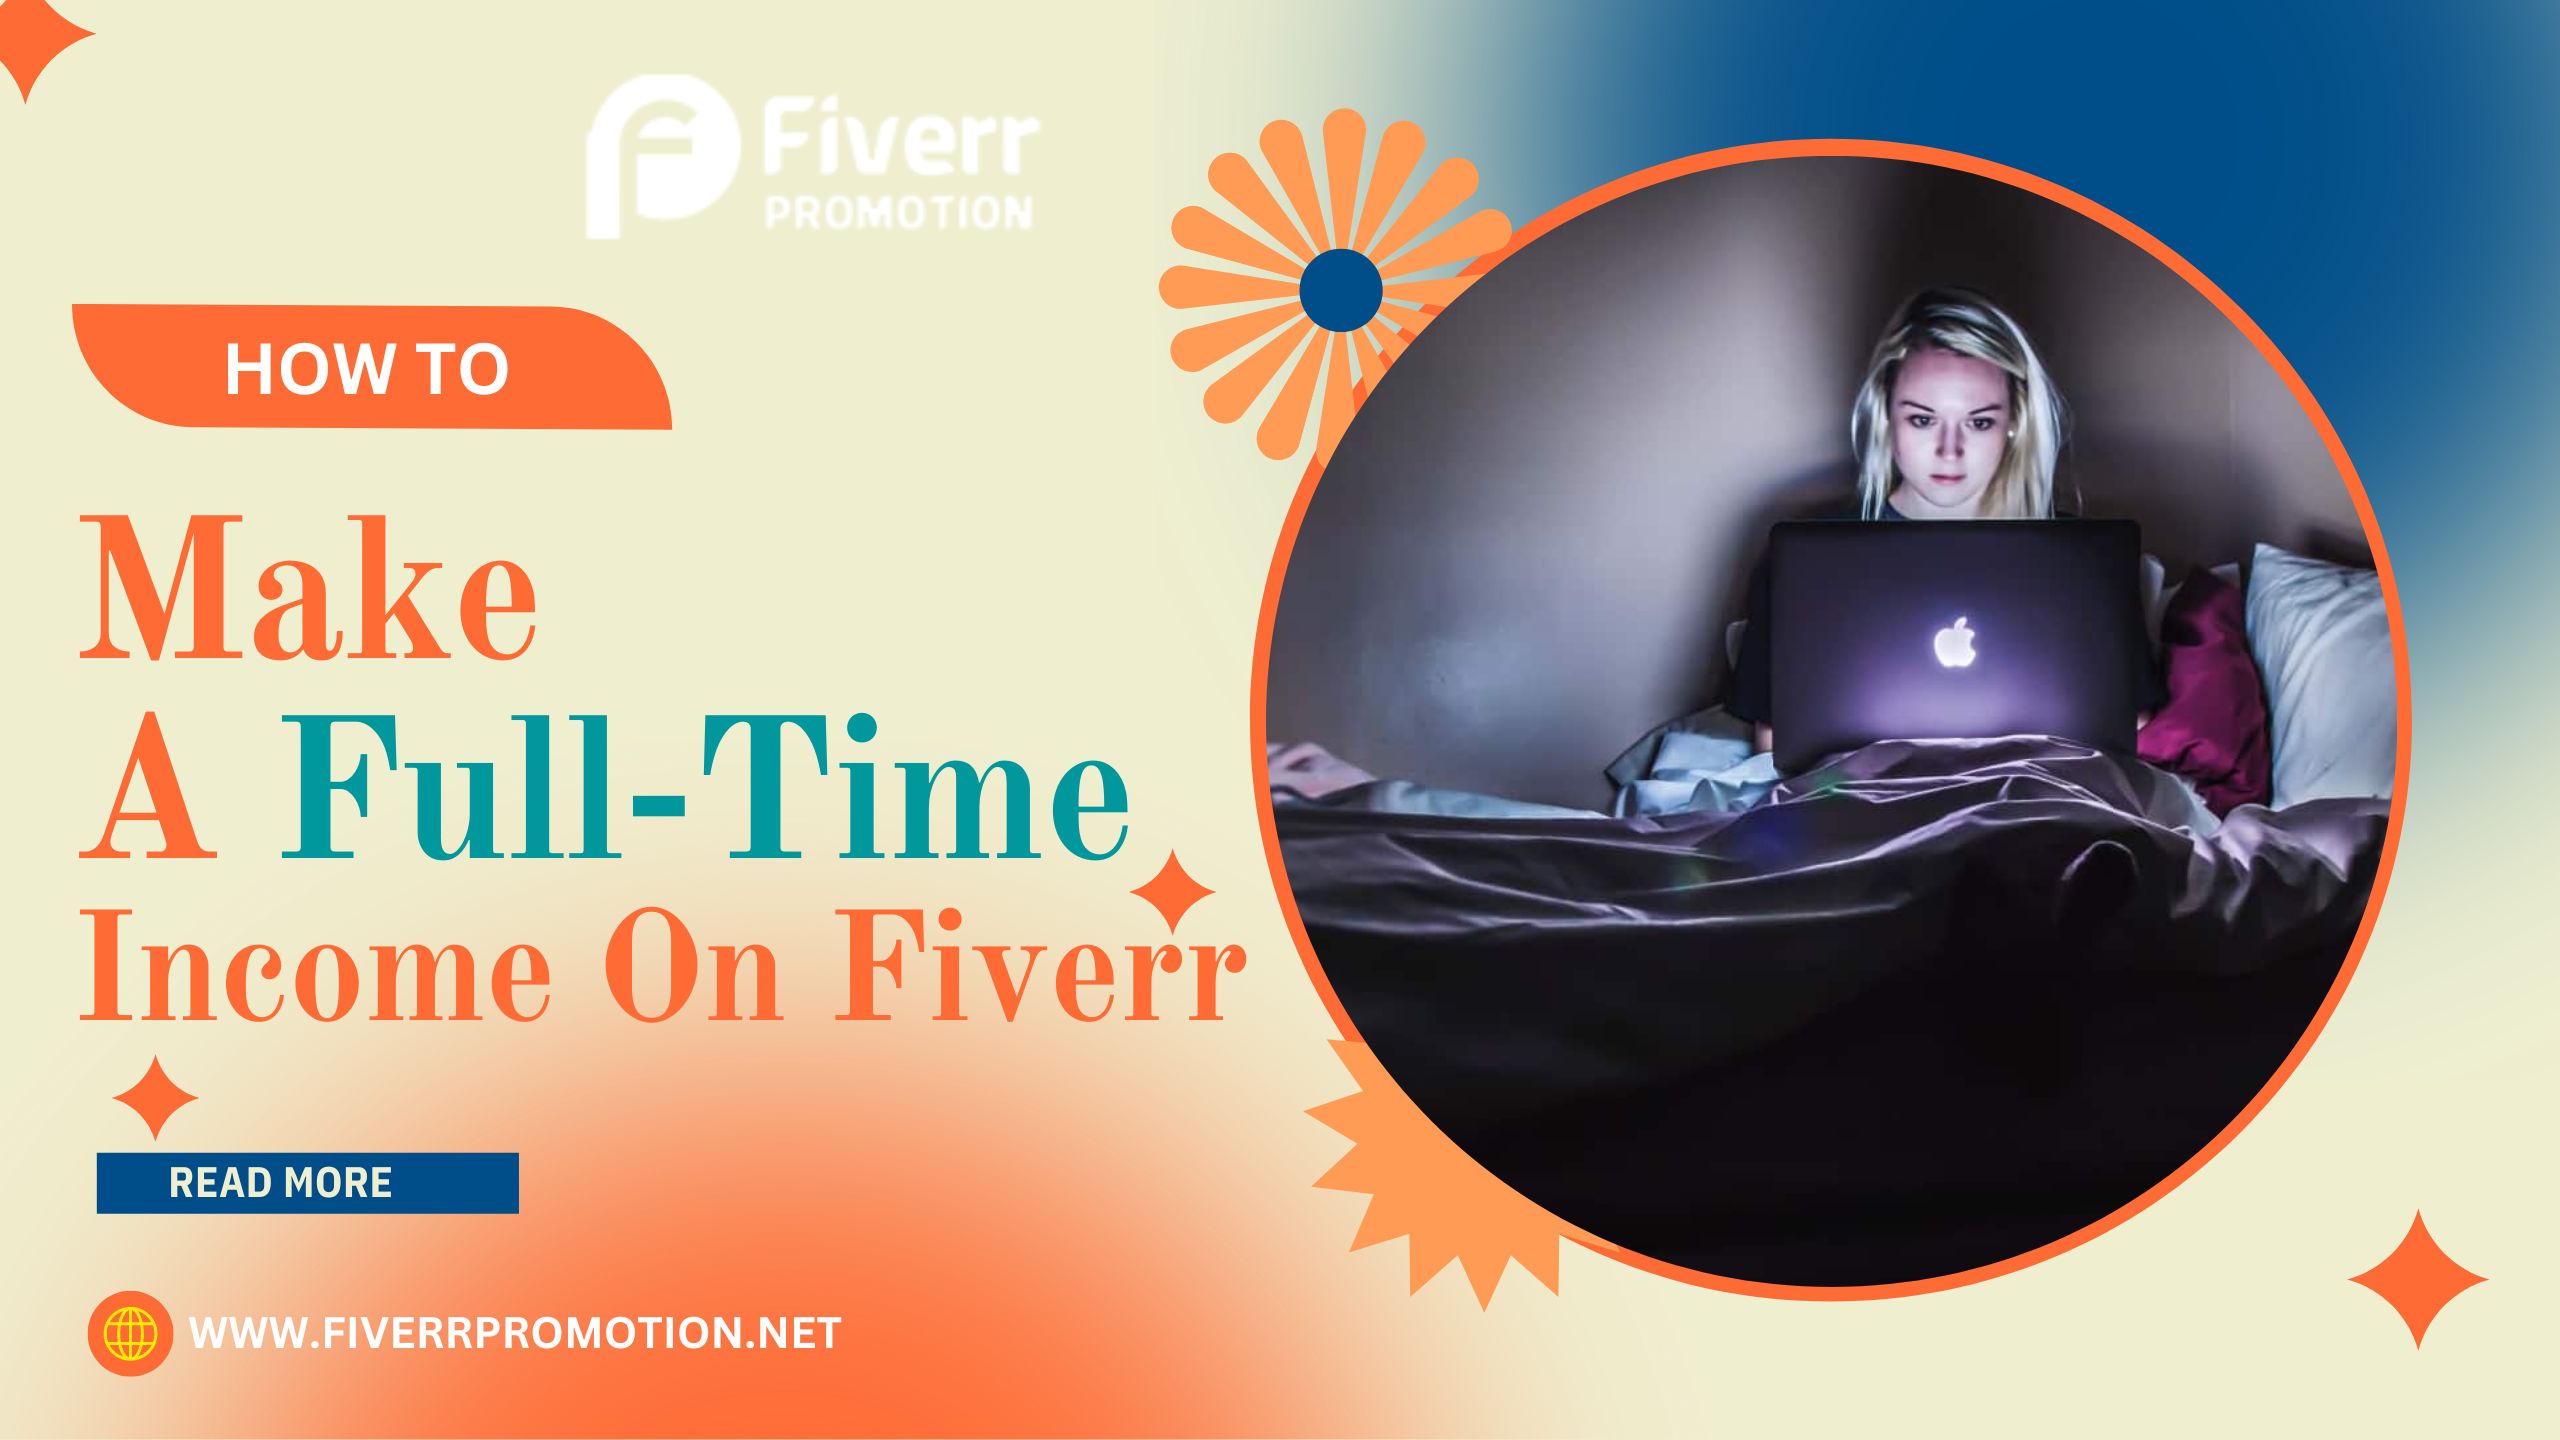 How to make a full-time income on Fiverr